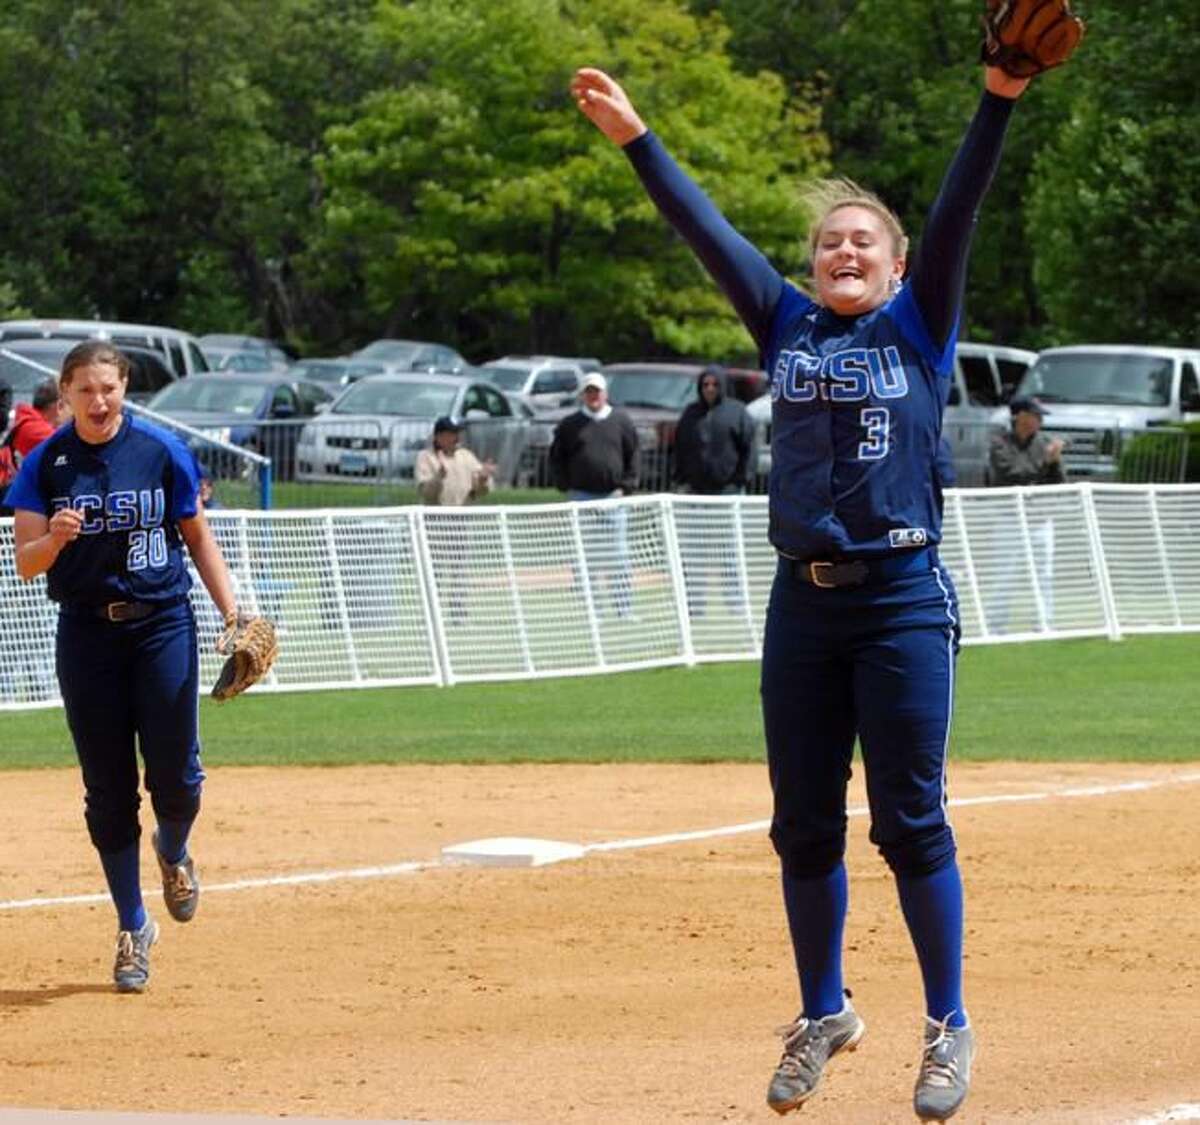 SCSU pitcher Jayme Larson raises her arms in victory after closing out the NE-1o championship. (Photo by Mara Lavitt/ New Haven Register)